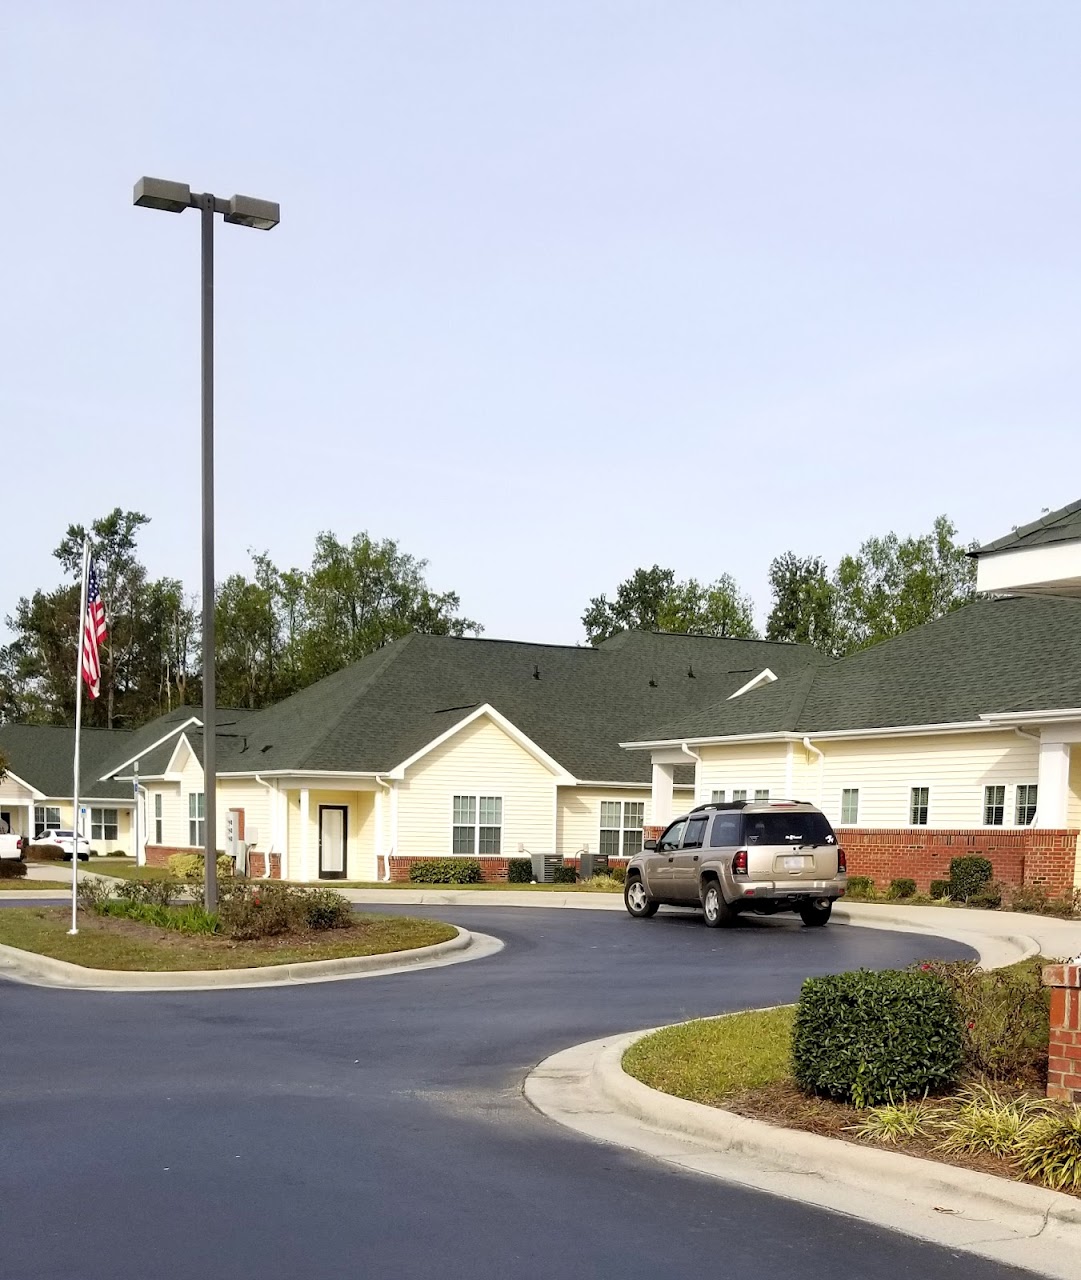 Photo of CAMERON GROVE. Affordable housing located at 150 LADY MARY LN ROCKINGHAM, NC 28379